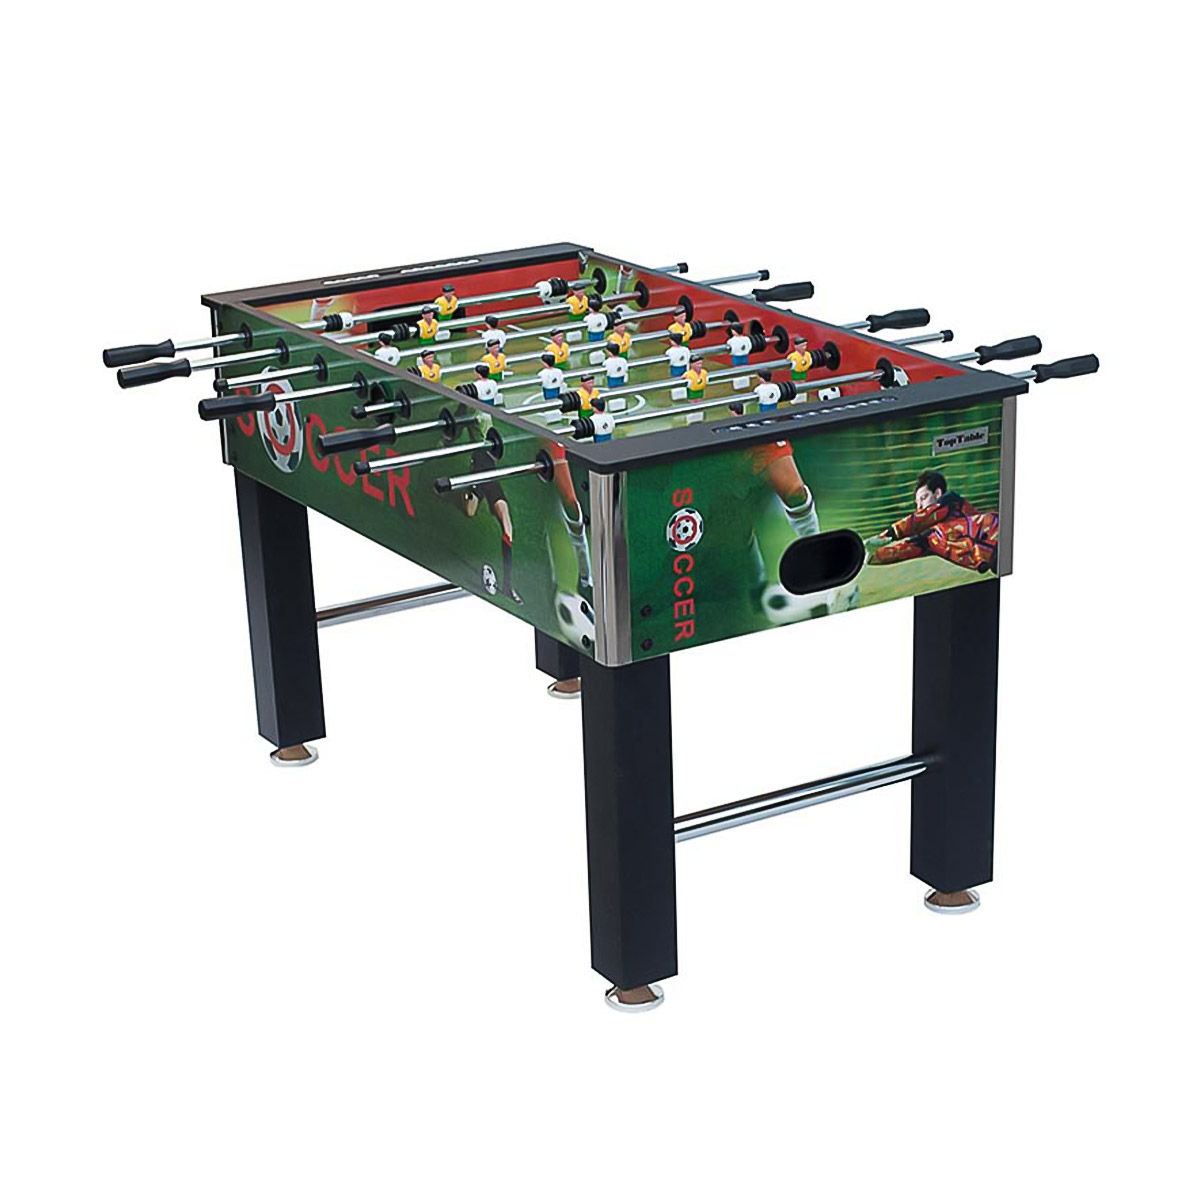 https://www.winmaxdartgame.com/4-5ft-official-competition-size-deluxe-foosball-table-for-multiplayer-indoor-play-win-max-product/